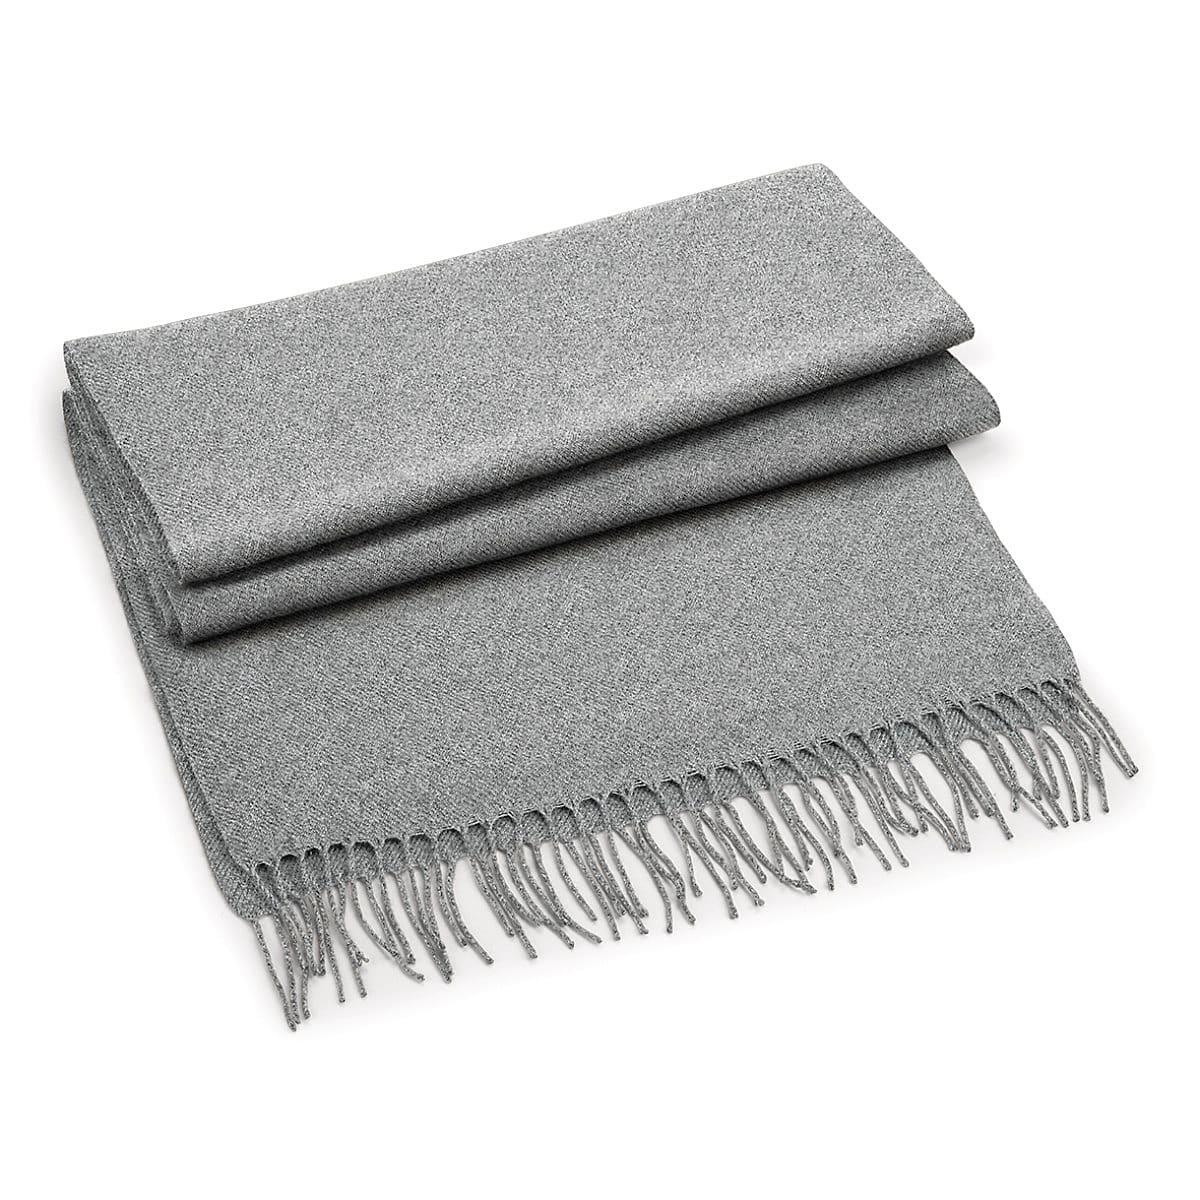 Beechfield Classic Woven Scarf in Heather Grey (Product Code: B500)